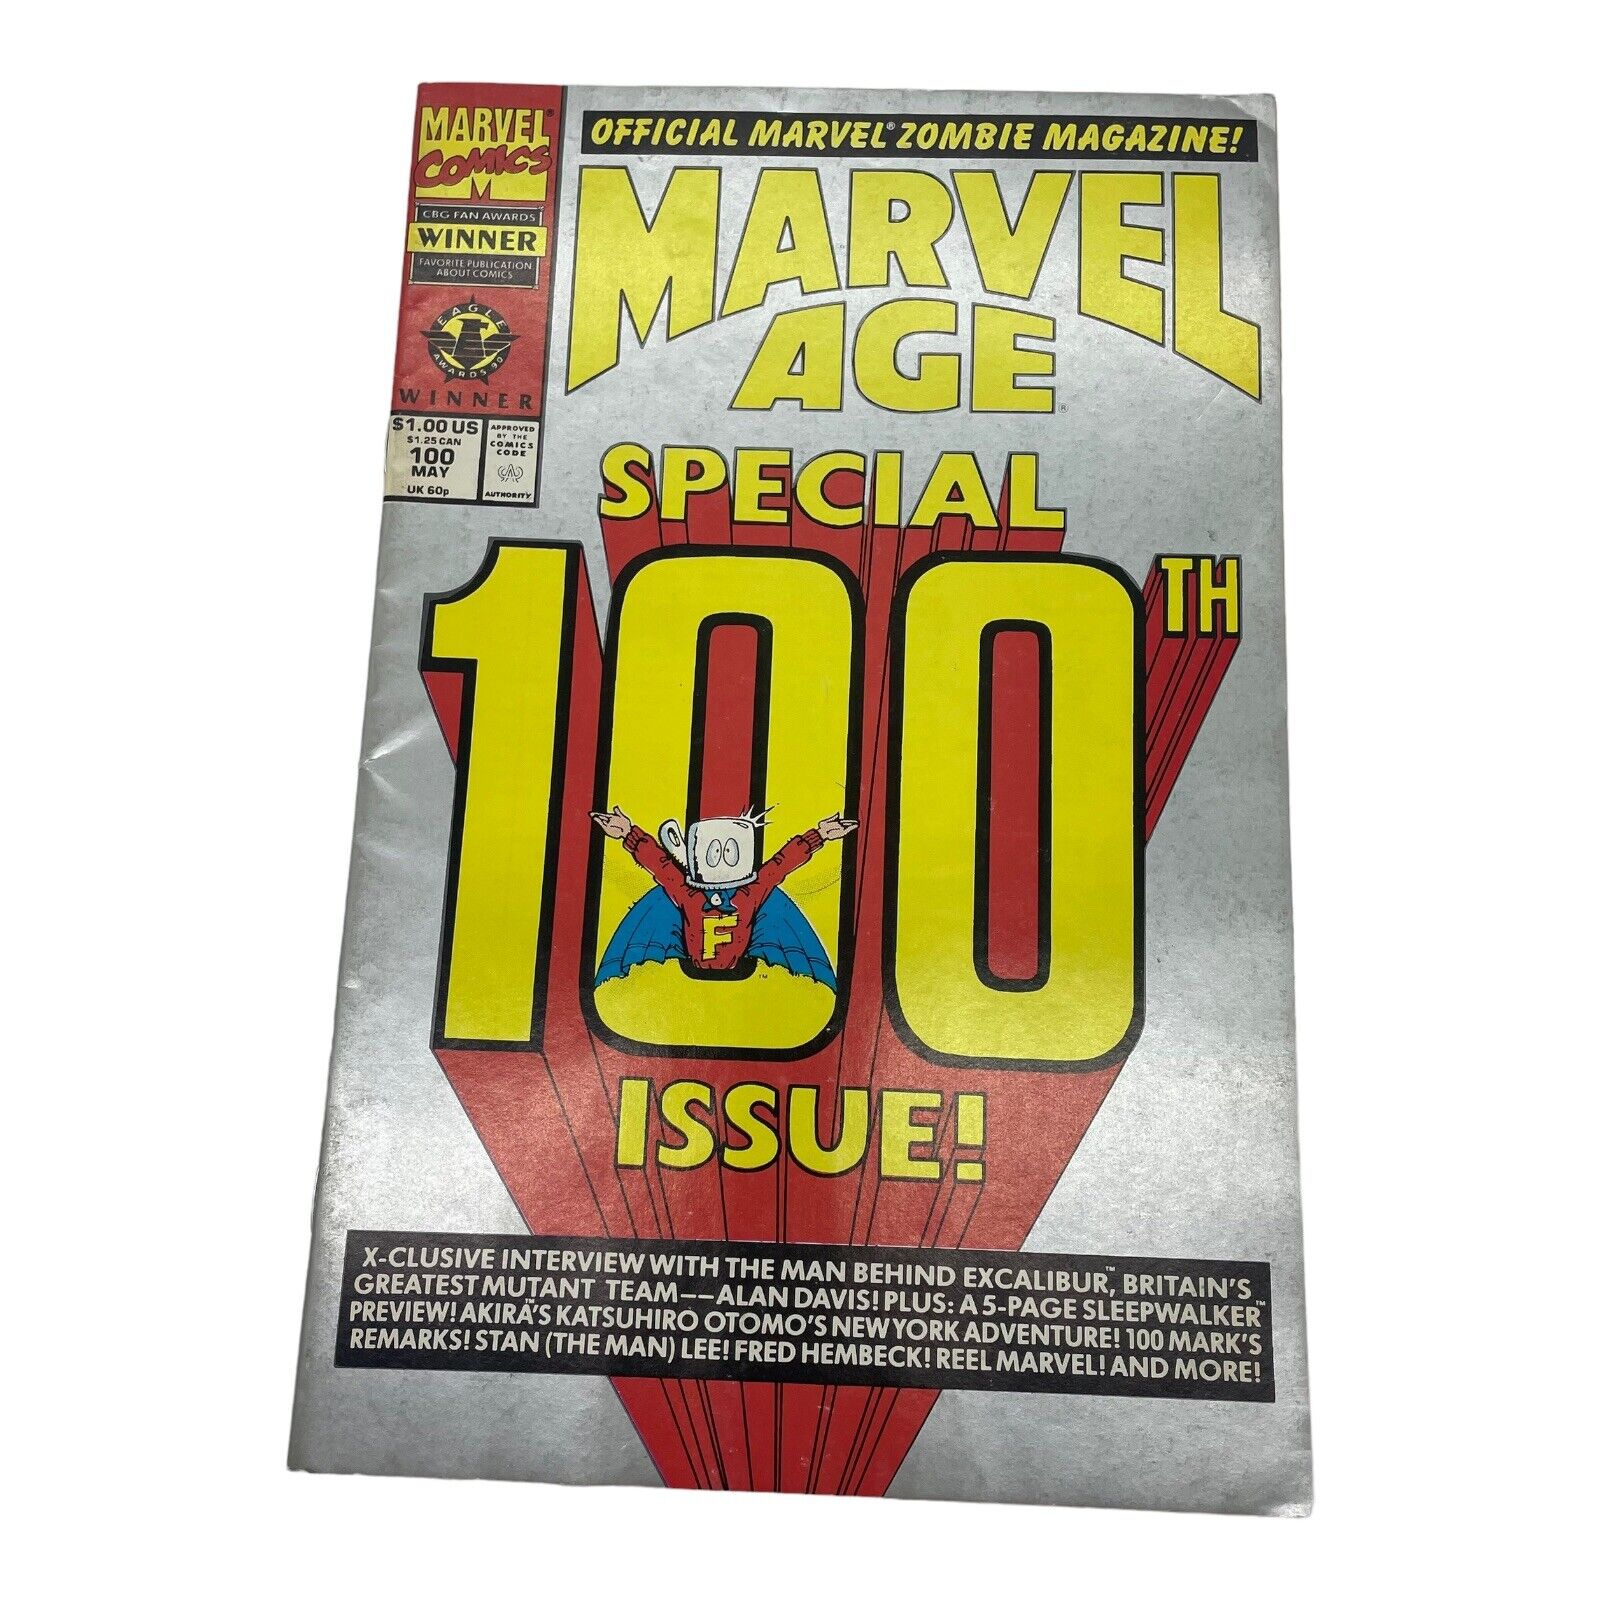 1991 Marvel Comics Marvel Age 100th Special Issue Officia Marvel Zombie Magazine